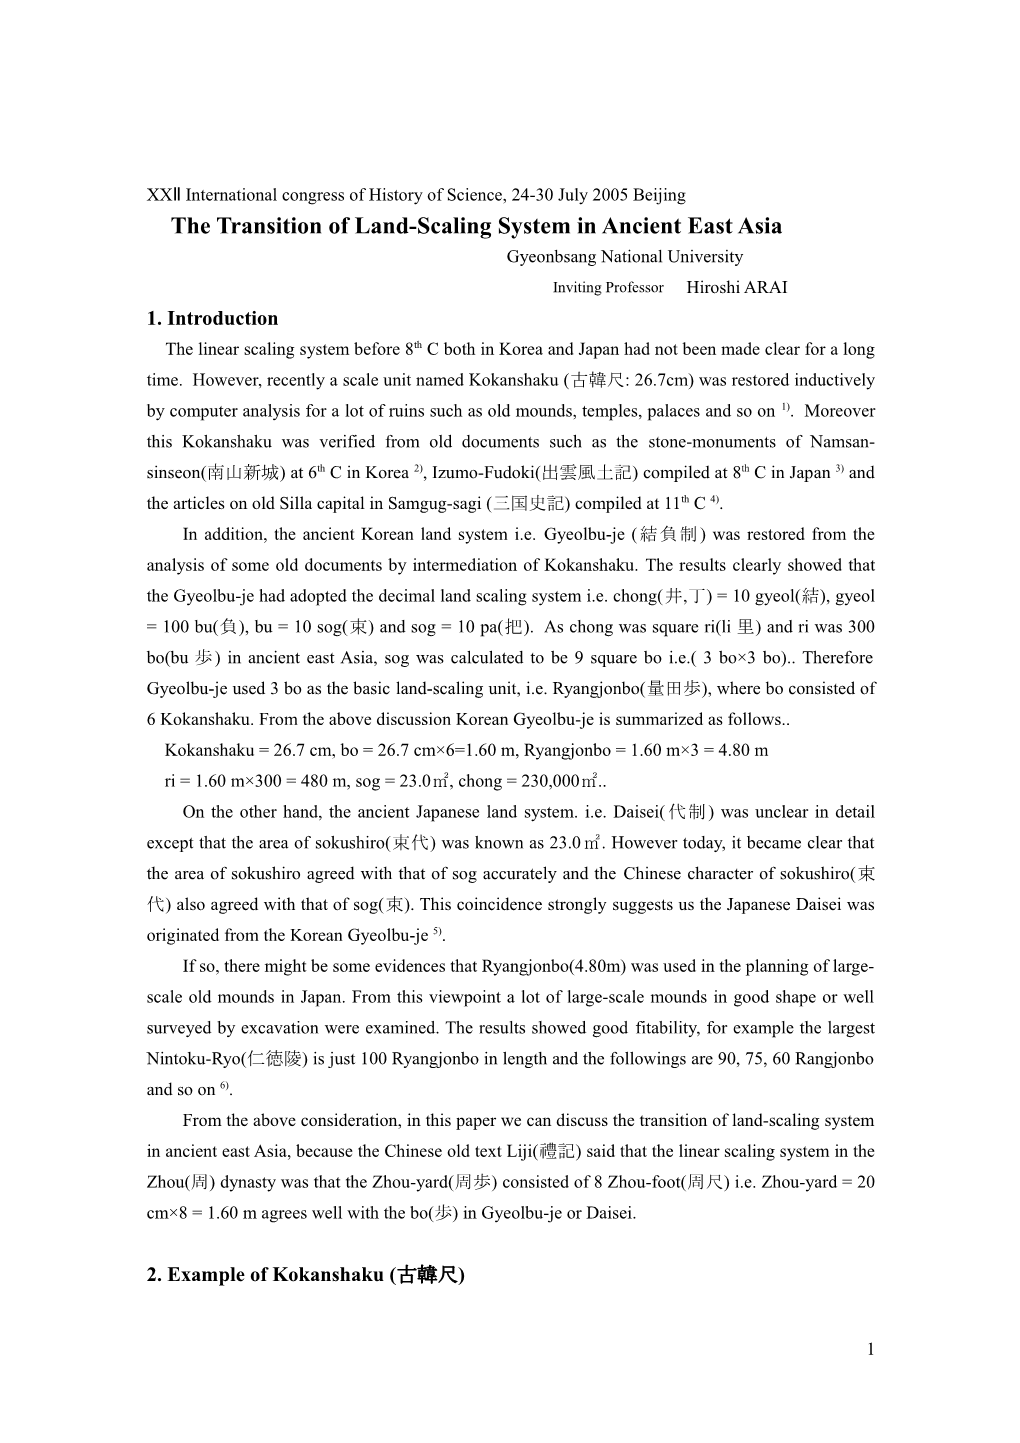 The Transition of Land-Scaling System in Ancient East Asia